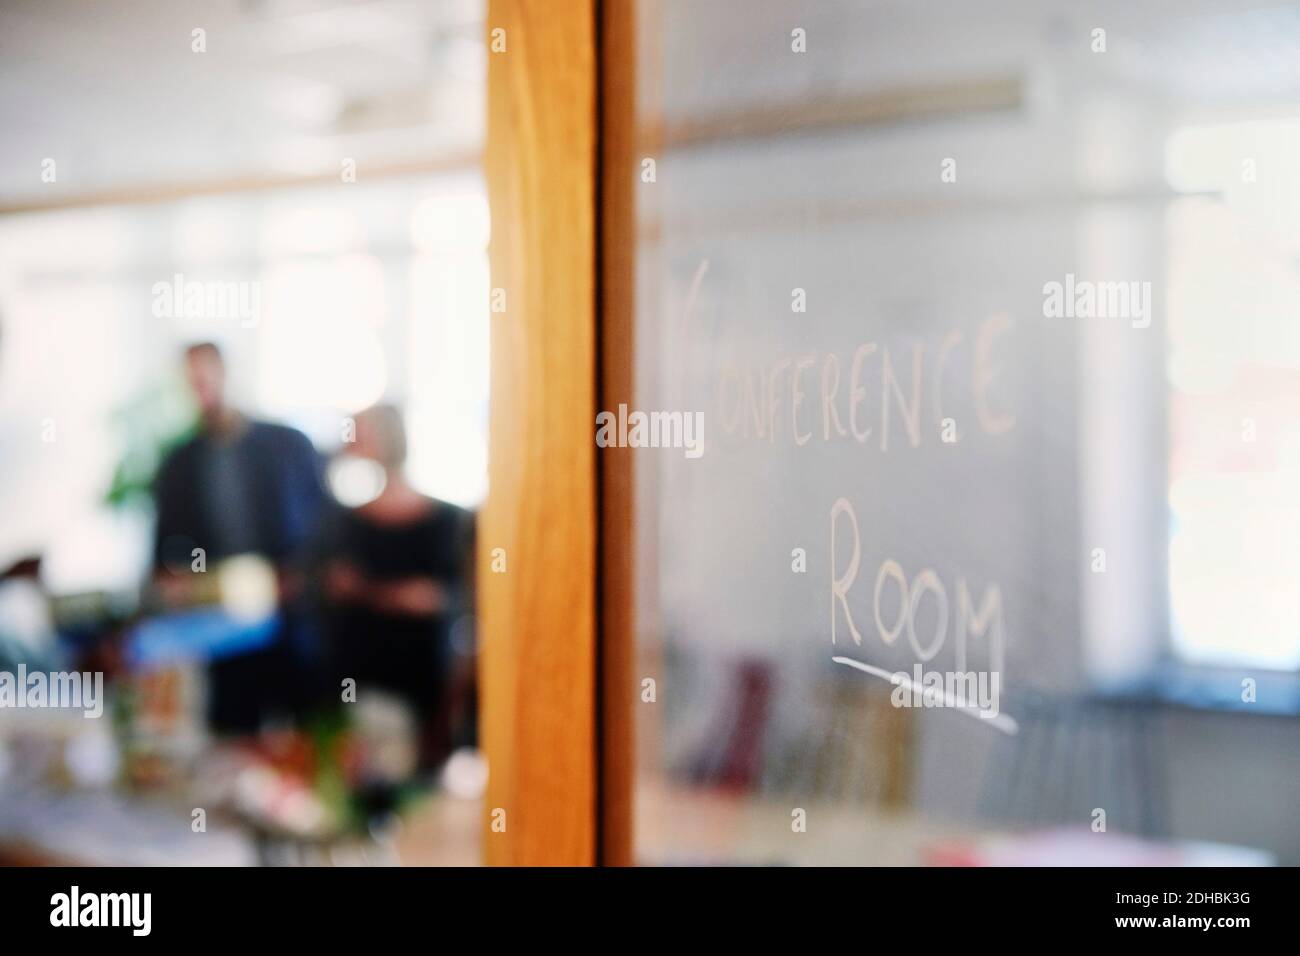 Conference room text on glass door in office Stock Photo